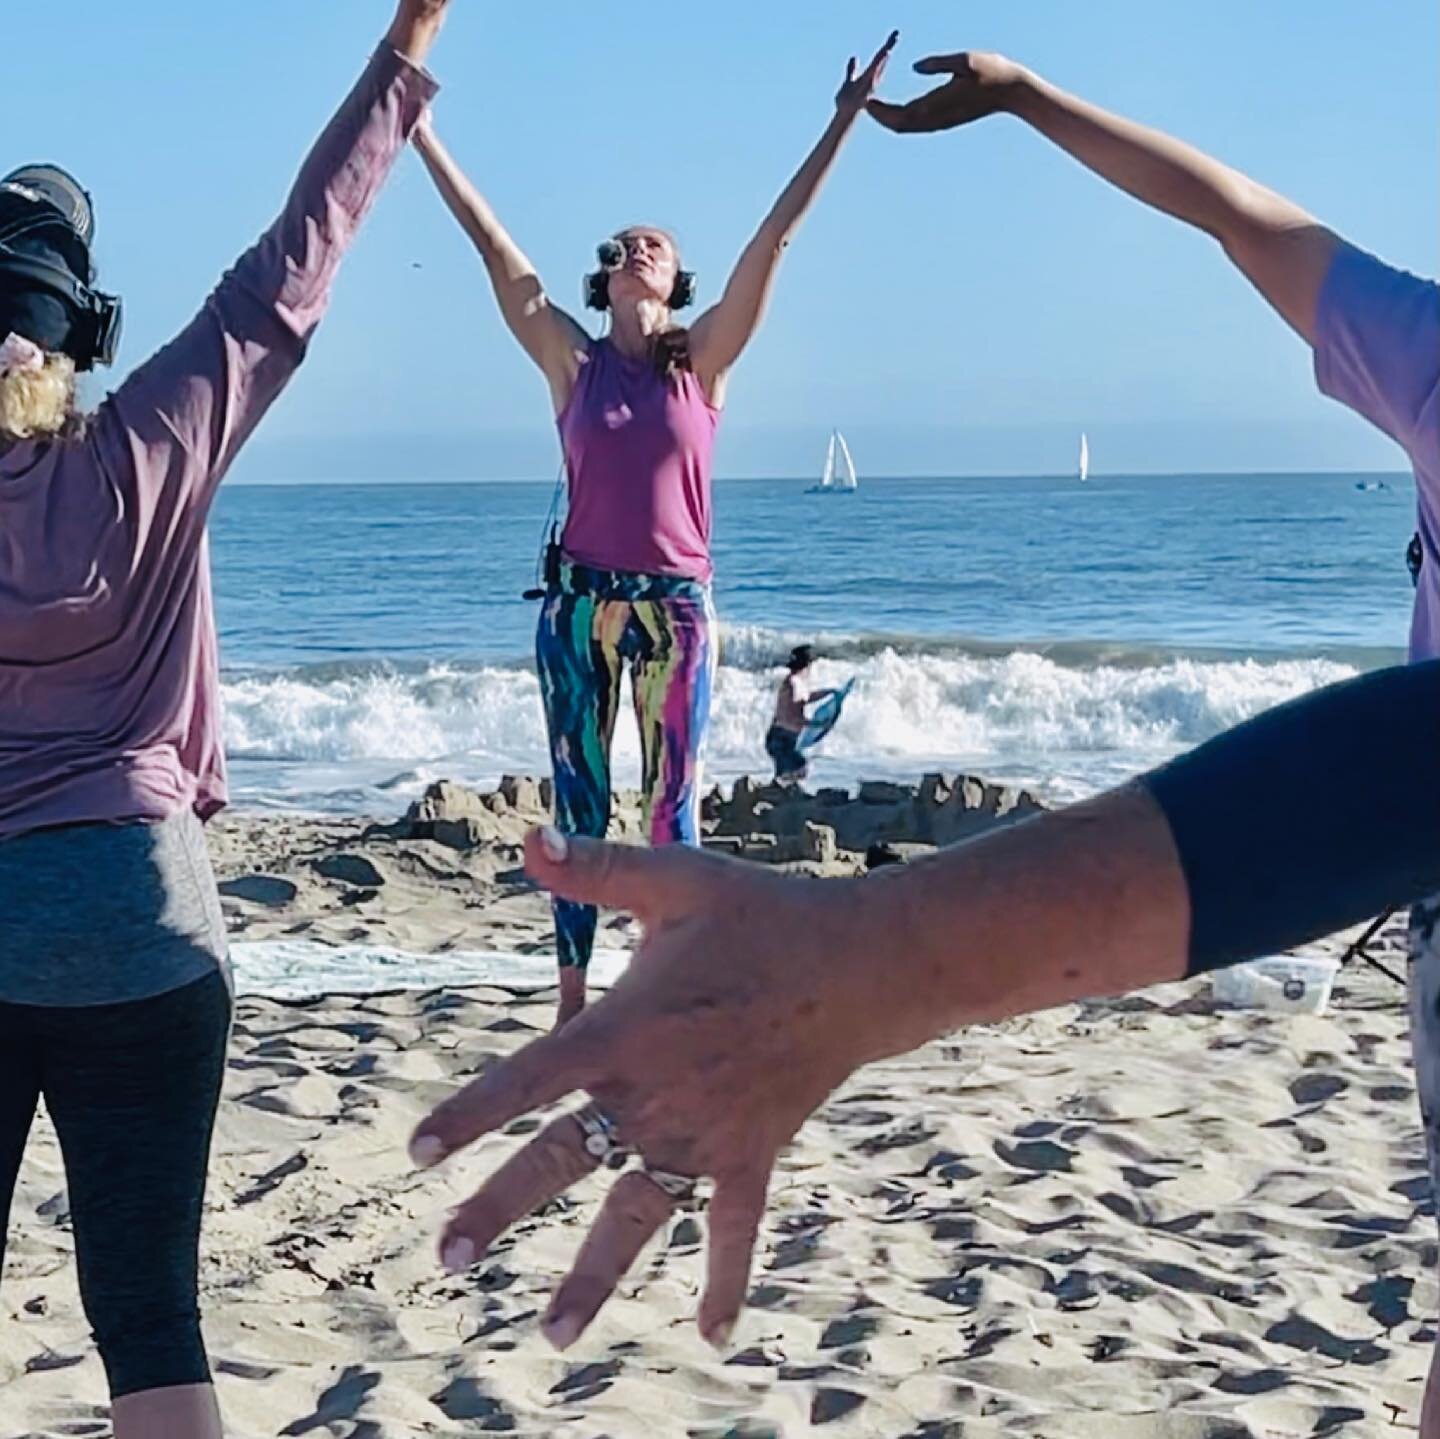 UNITED
How yoga and nature brings people together in the most beautiful way✨

Thank you Daniela for kicking off our new Wednesday evening &ldquo;magic hour&rdquo; unwind 🌊🧘☀️🙏🏼 thank you ocean for the epic views.

Feel-good beach flows for all bo